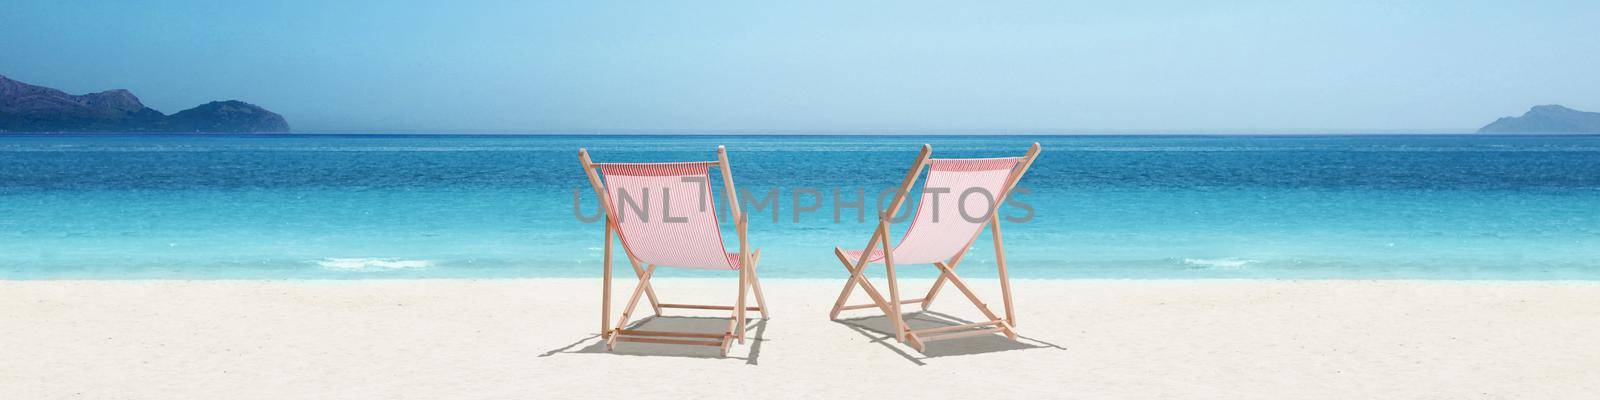 Relax on tropical beach in the sun on deck chairs. by Taut